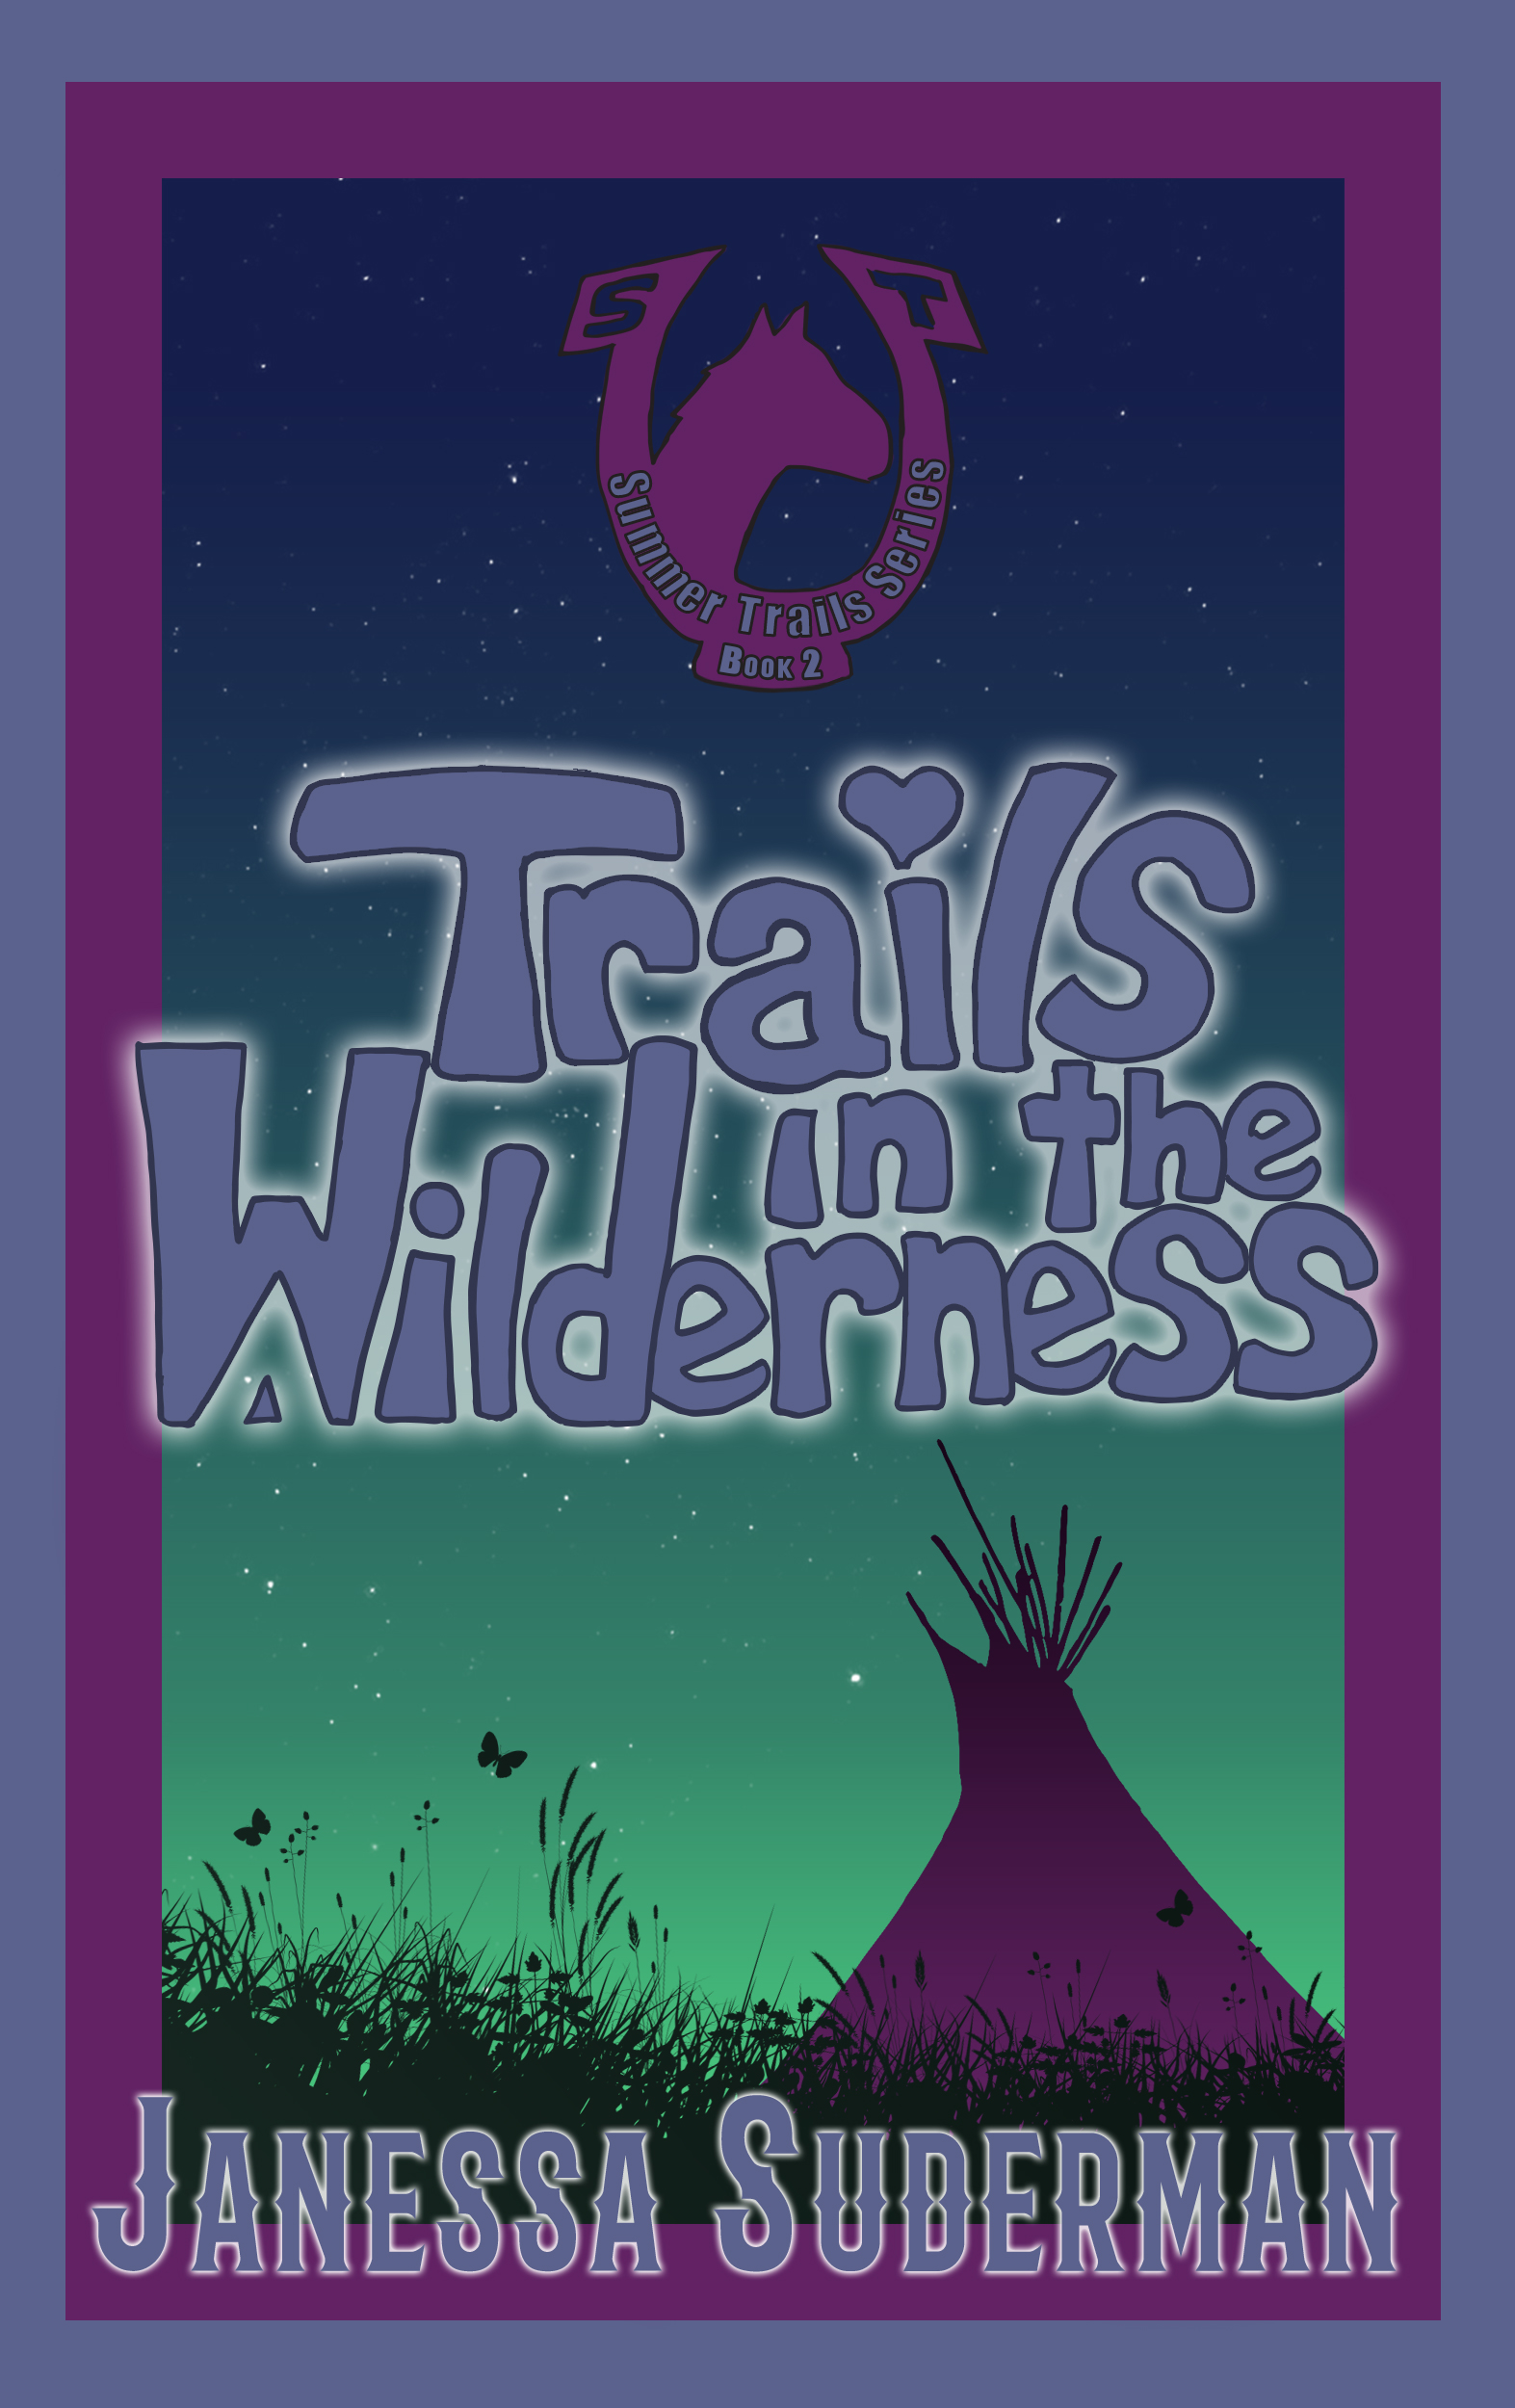 Trails in the Wilderness